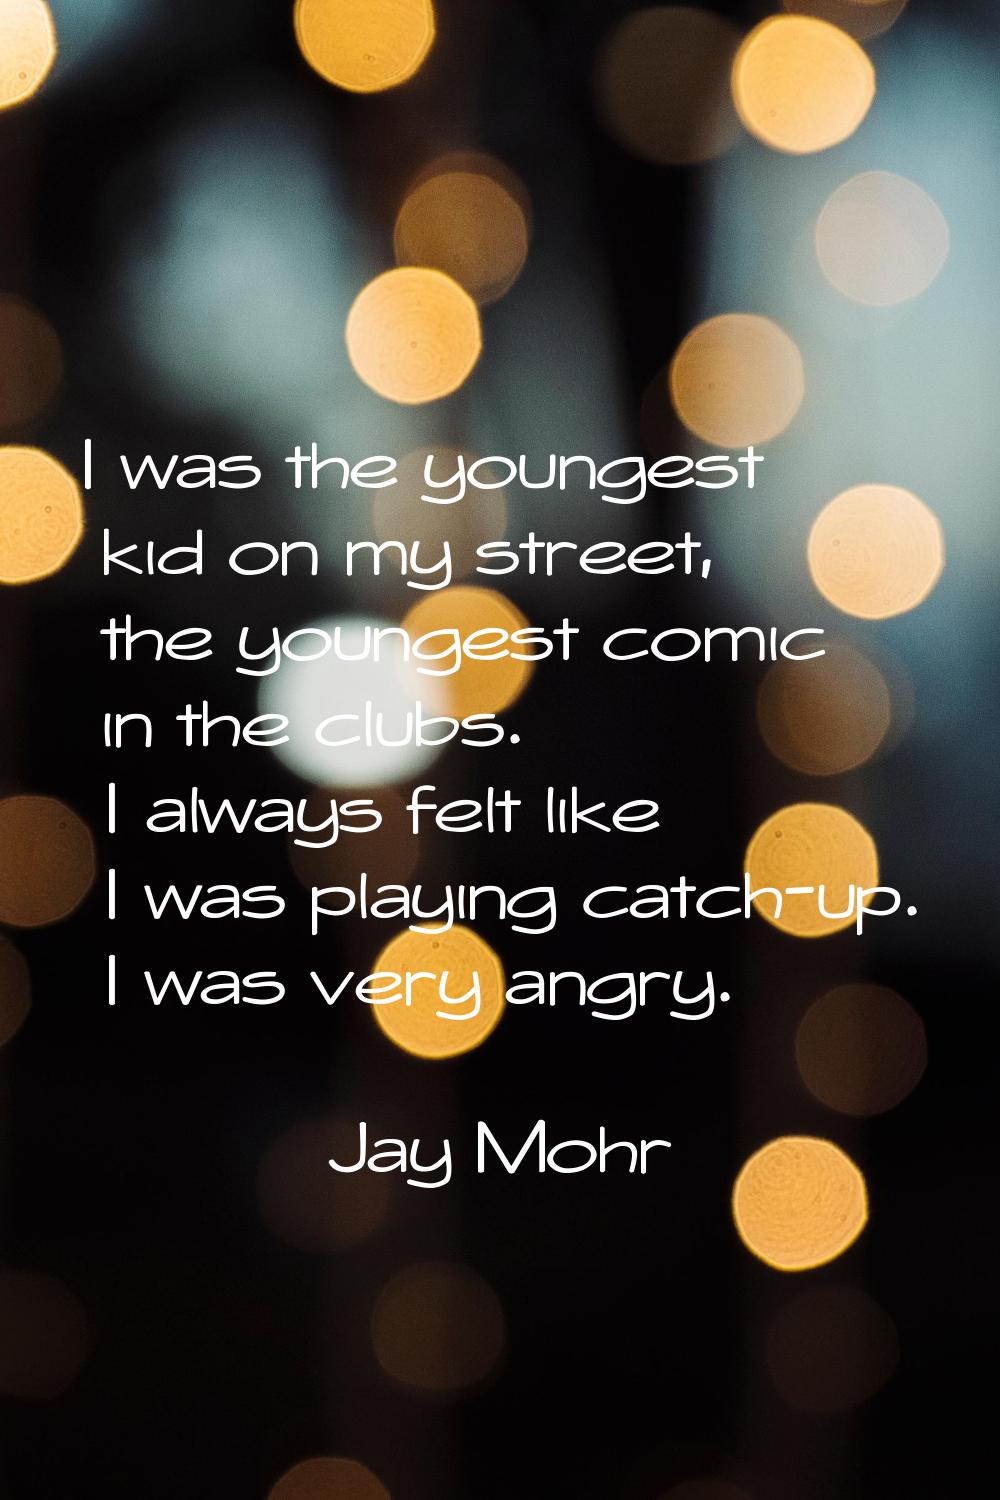 I was the youngest kid on my street, the youngest comic in the clubs. I always felt like I was play